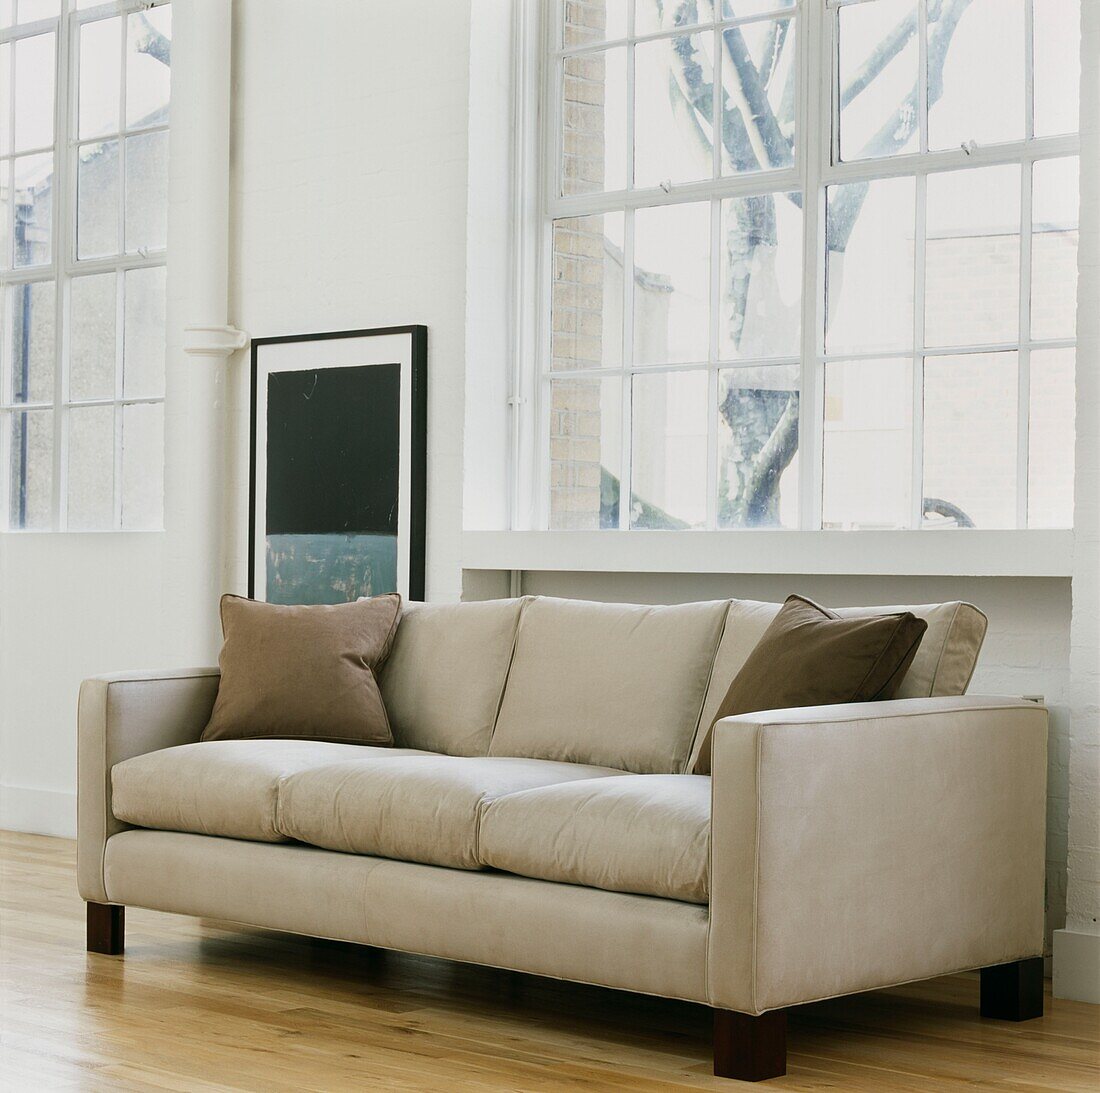 Cream sofa with modern artwork at uncurtained window